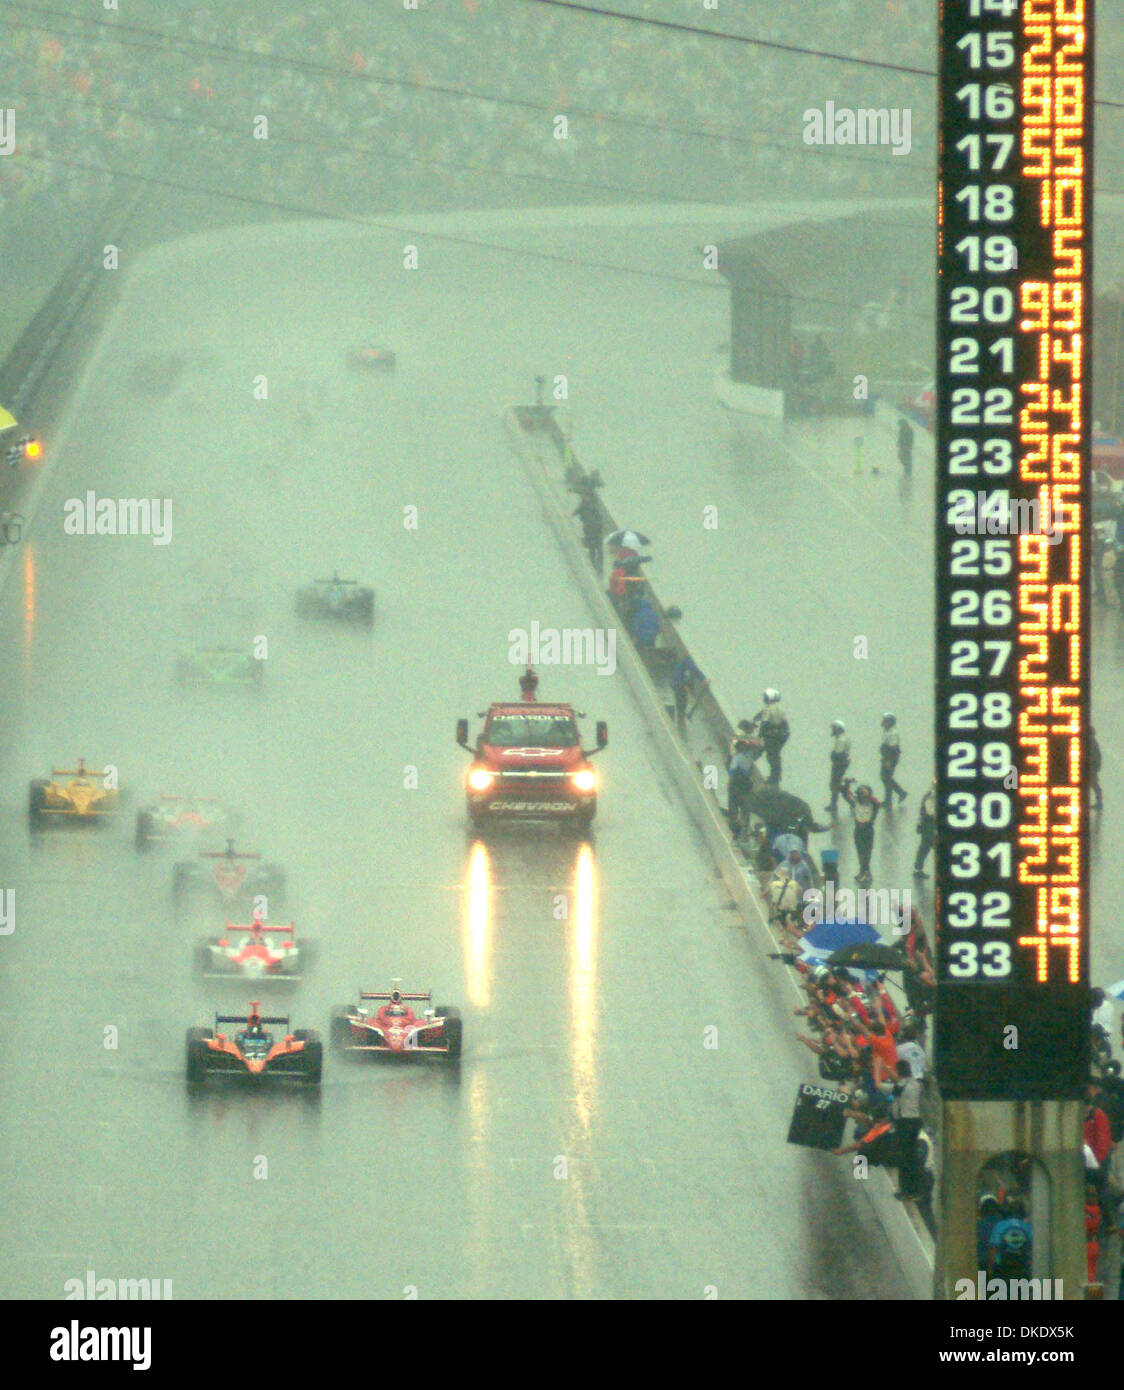 May 27, 2007 - Indianapolis, IA, USA - DARIO FRANCHITTI is seen in the lead as he crosses the finish line under a yellow flag and in a driving rain storm to take the victory at the Indianapolis 500.   (Credit Image: © Michael Williams/ZUMA Press) Stock Photo